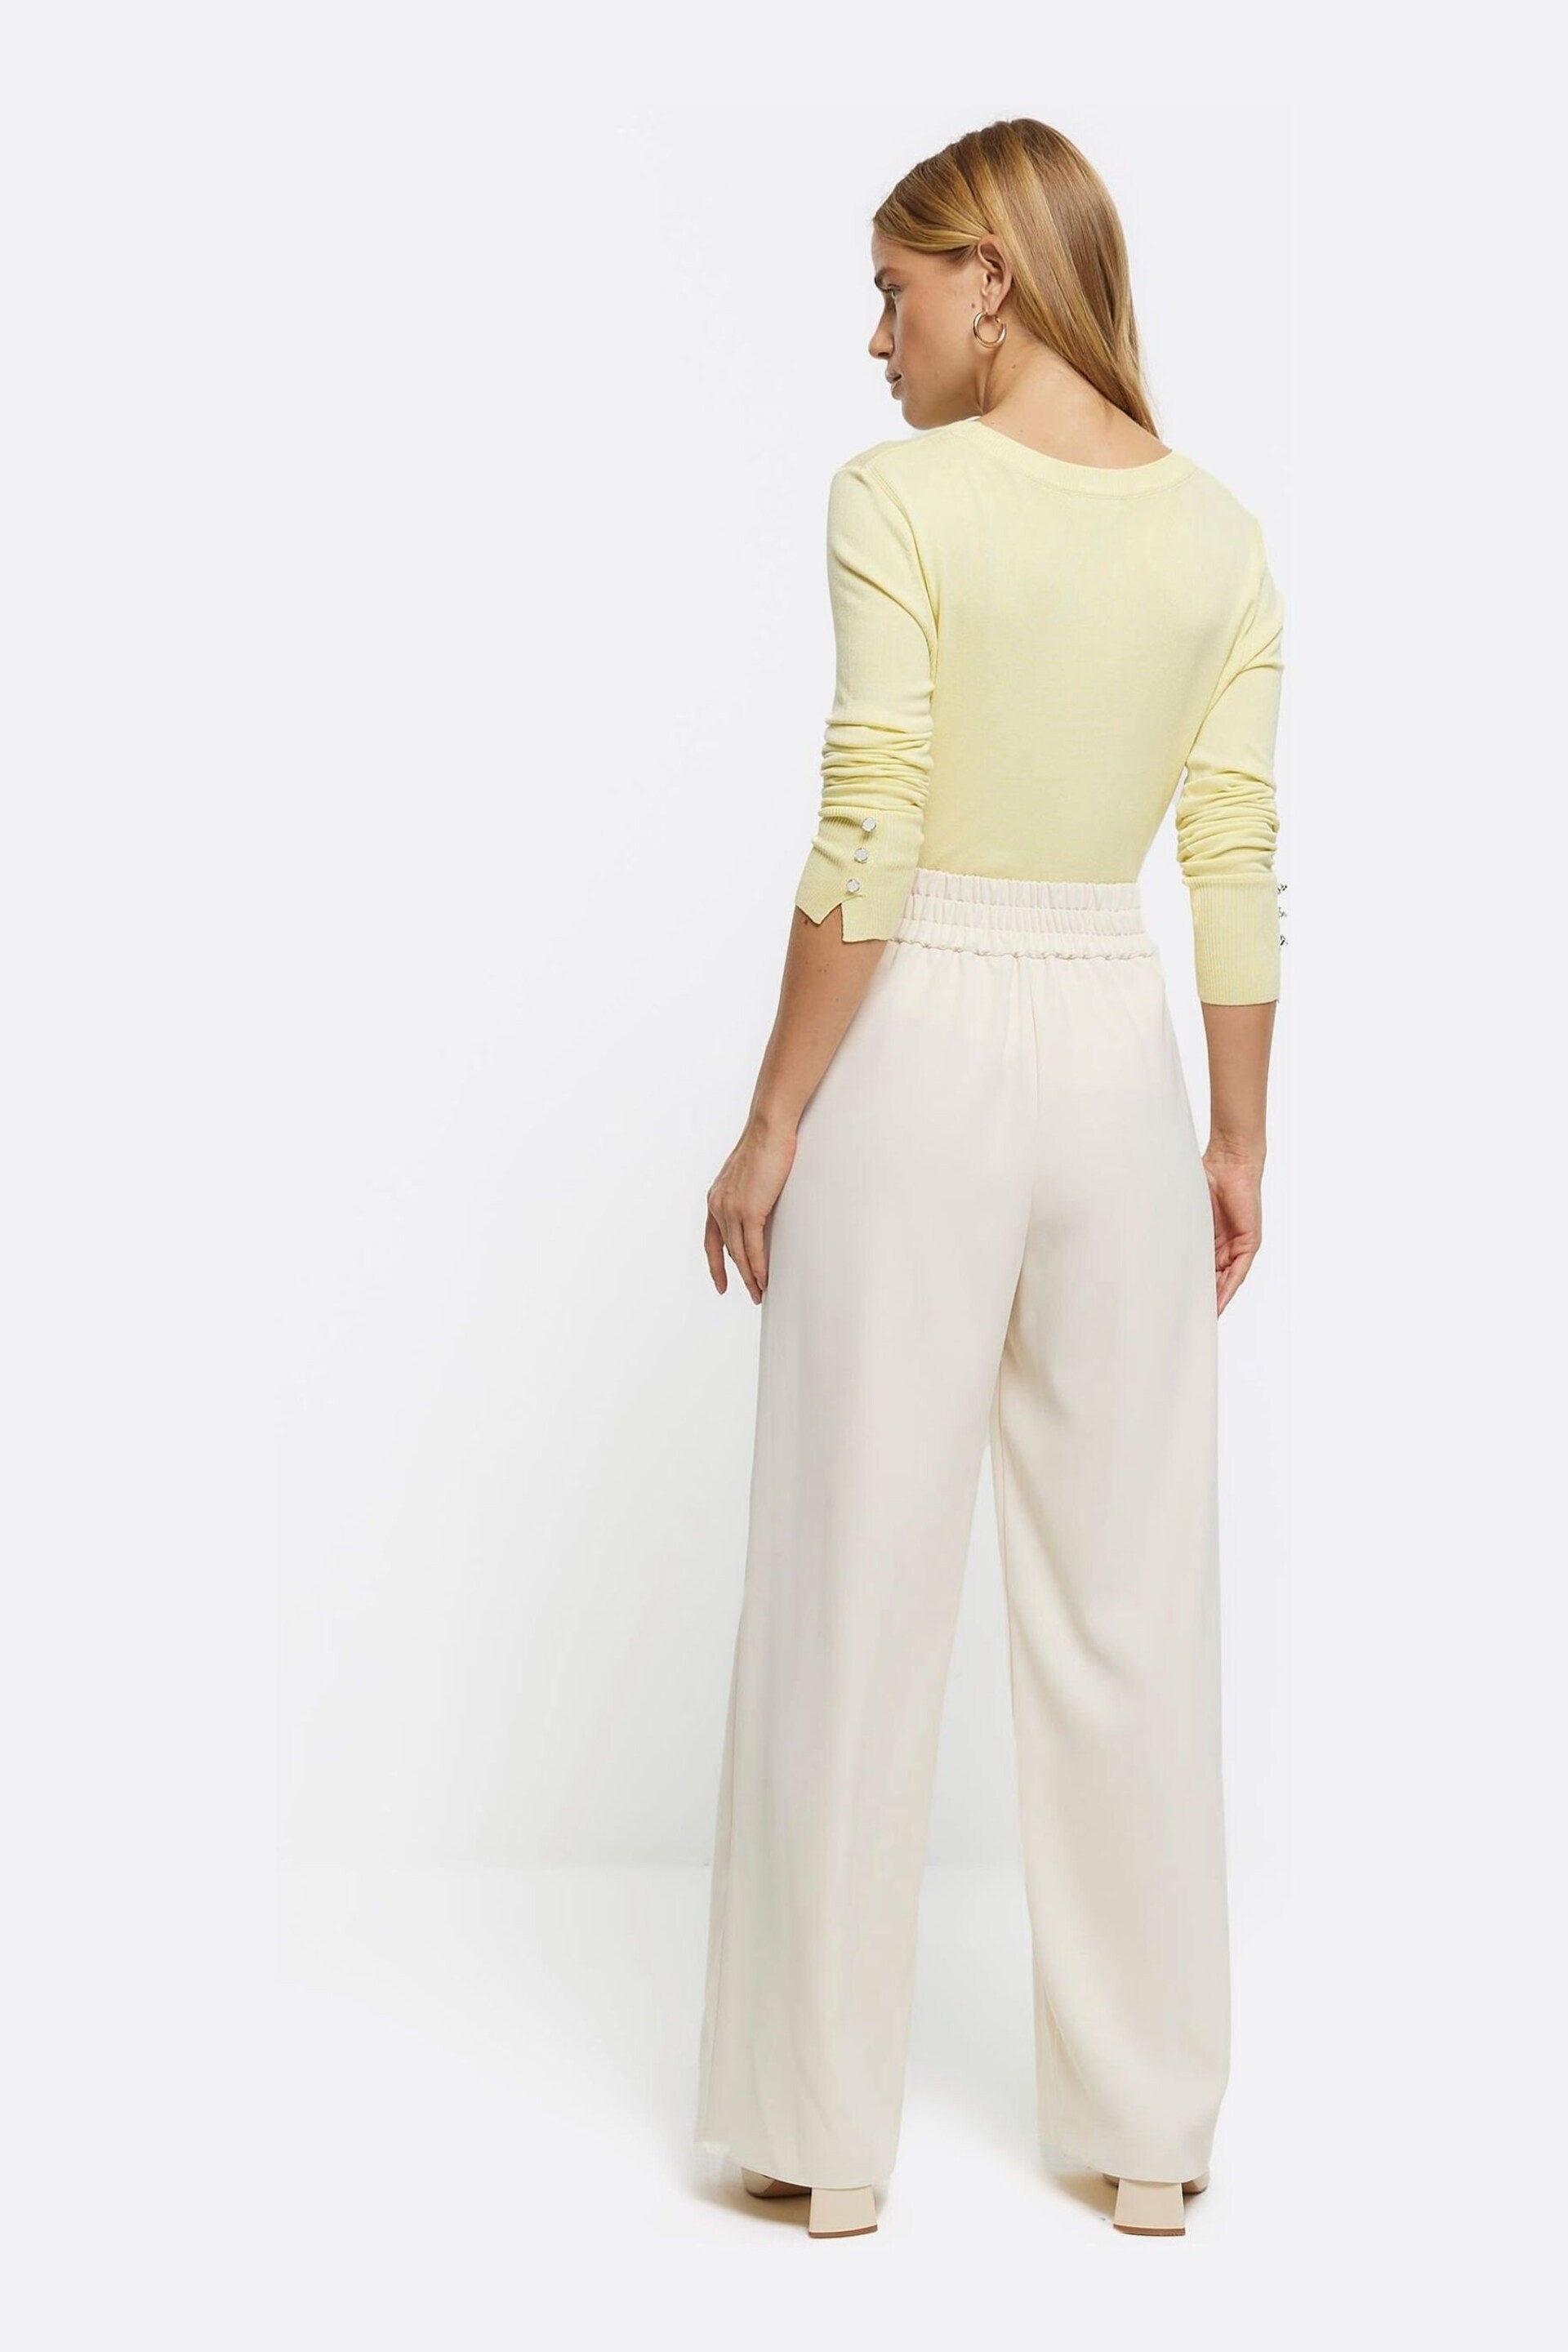 River Island Cream Wide Leg Pleated Clean Trousers - Image 2 of 6